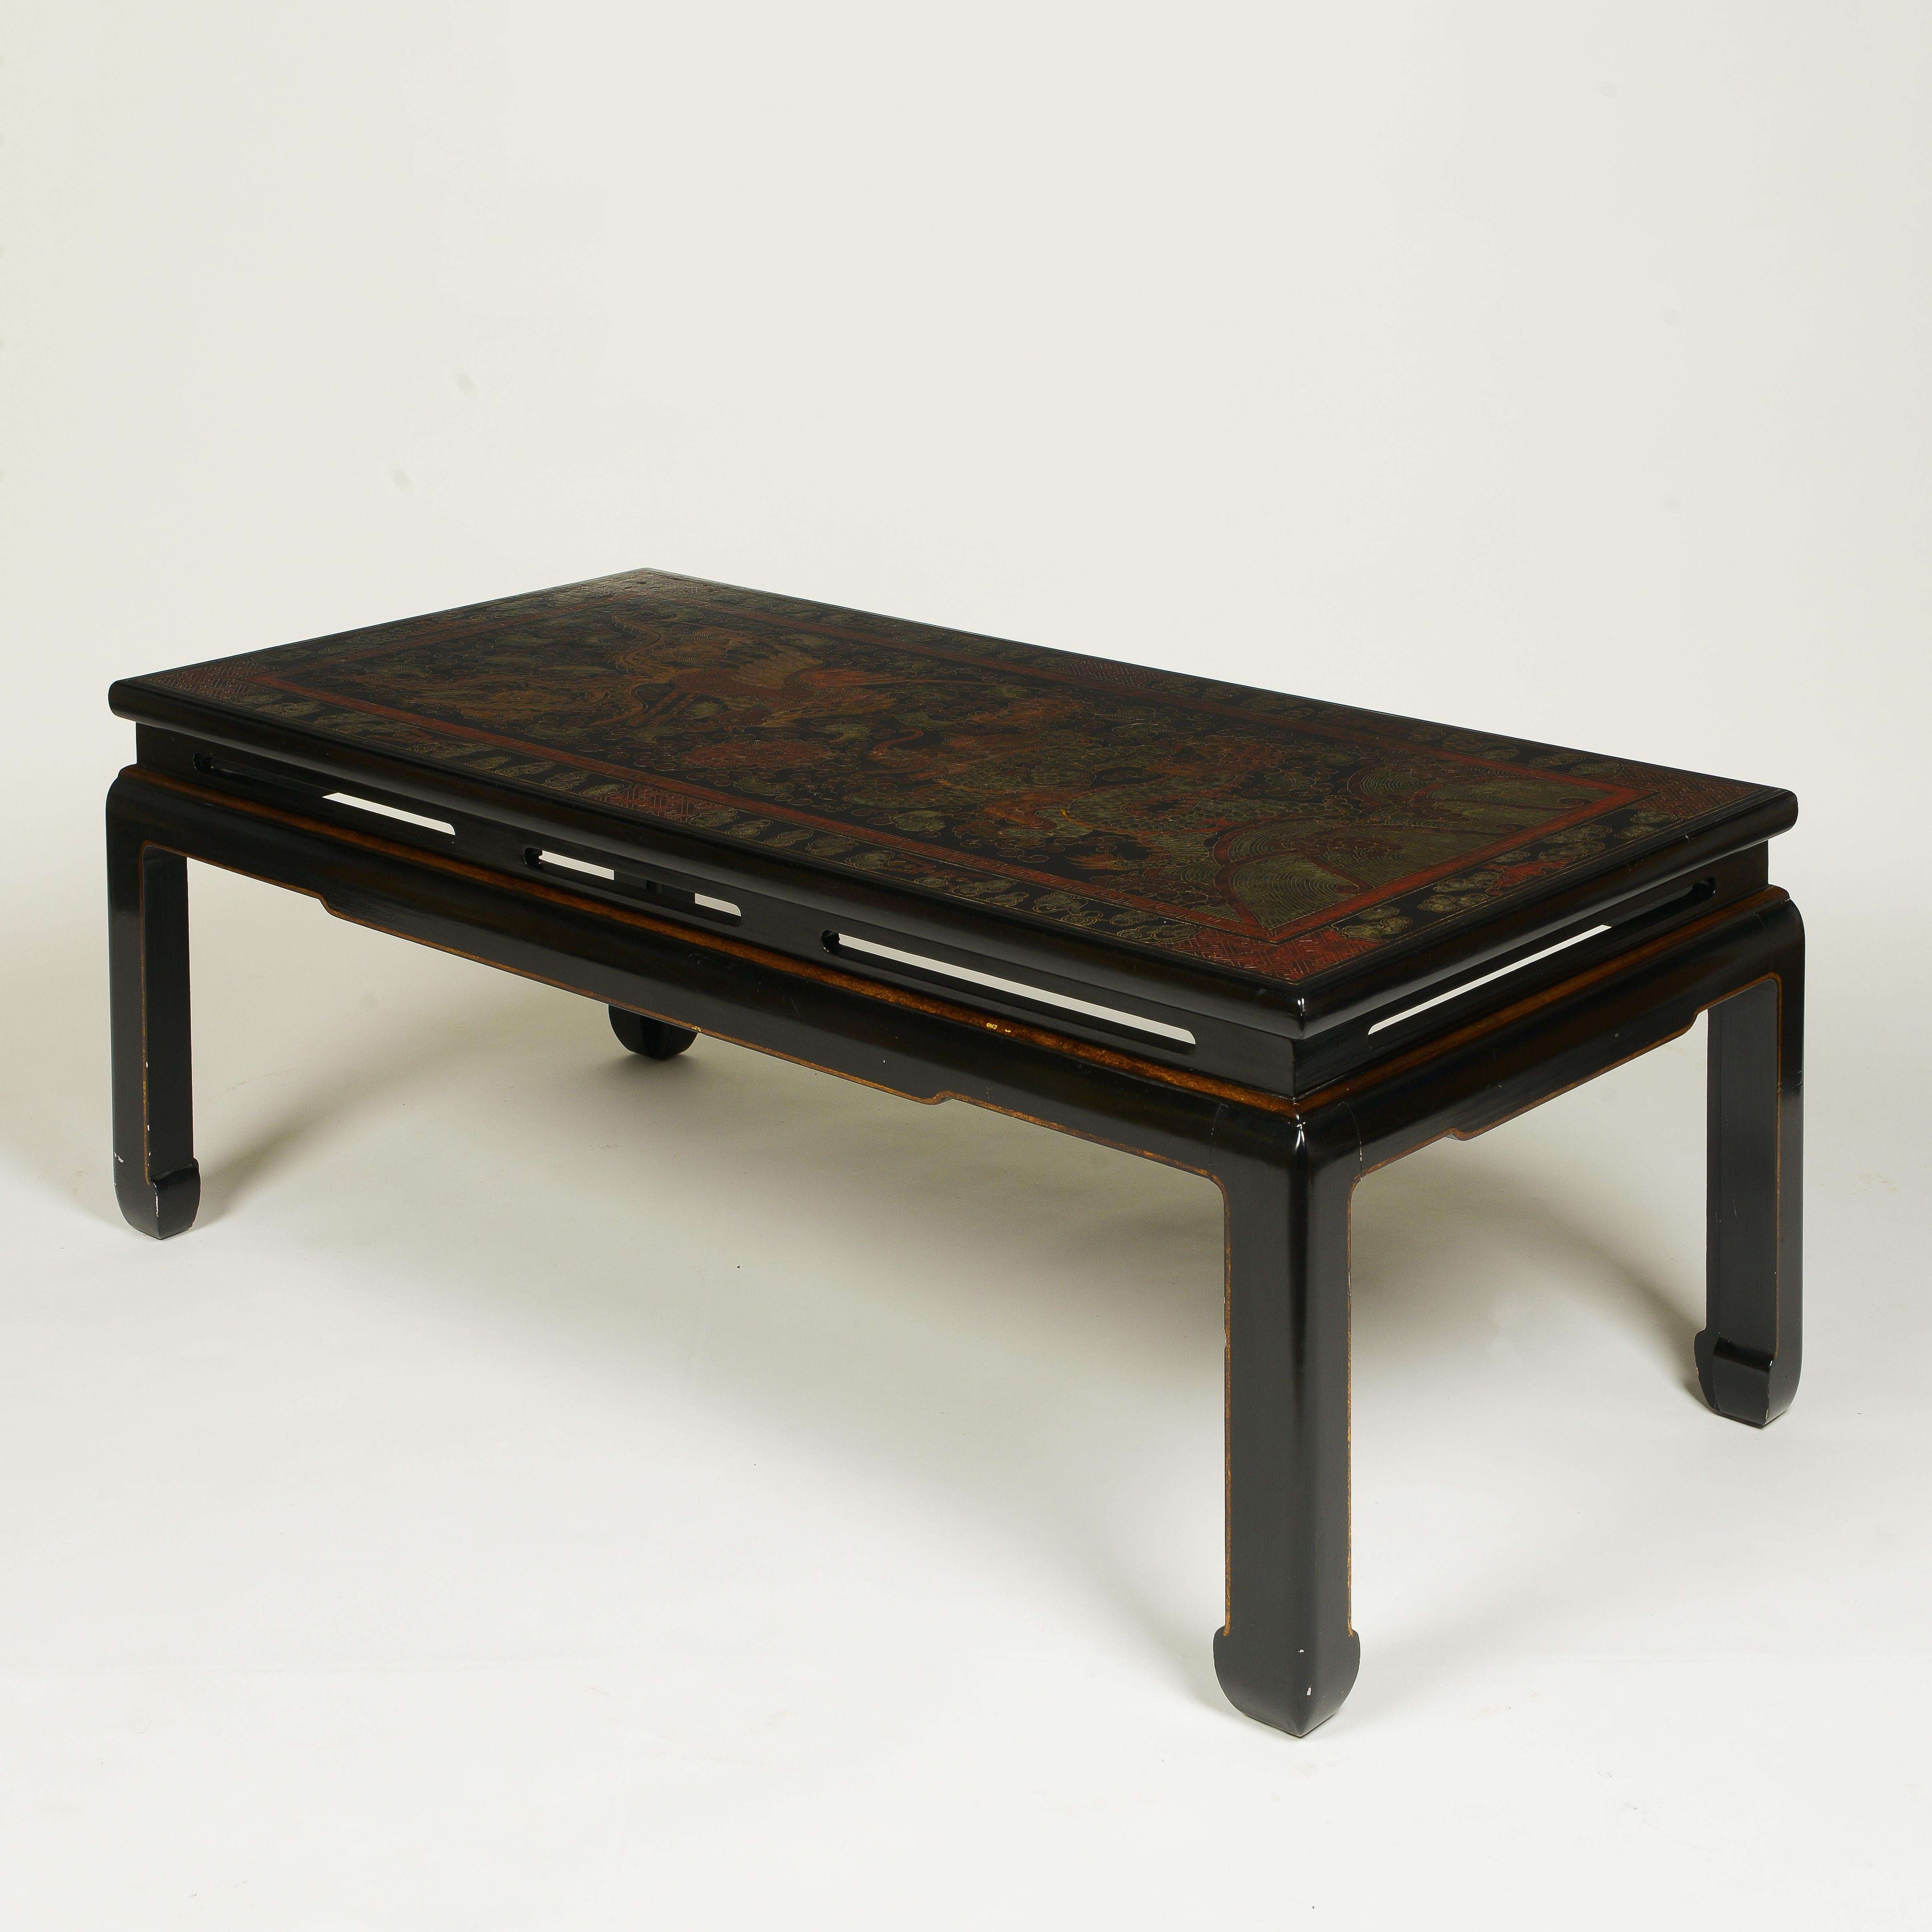 The rectangular top incised with dragon and phoenix chinoiserie decoration; raised on Ming-style legs.